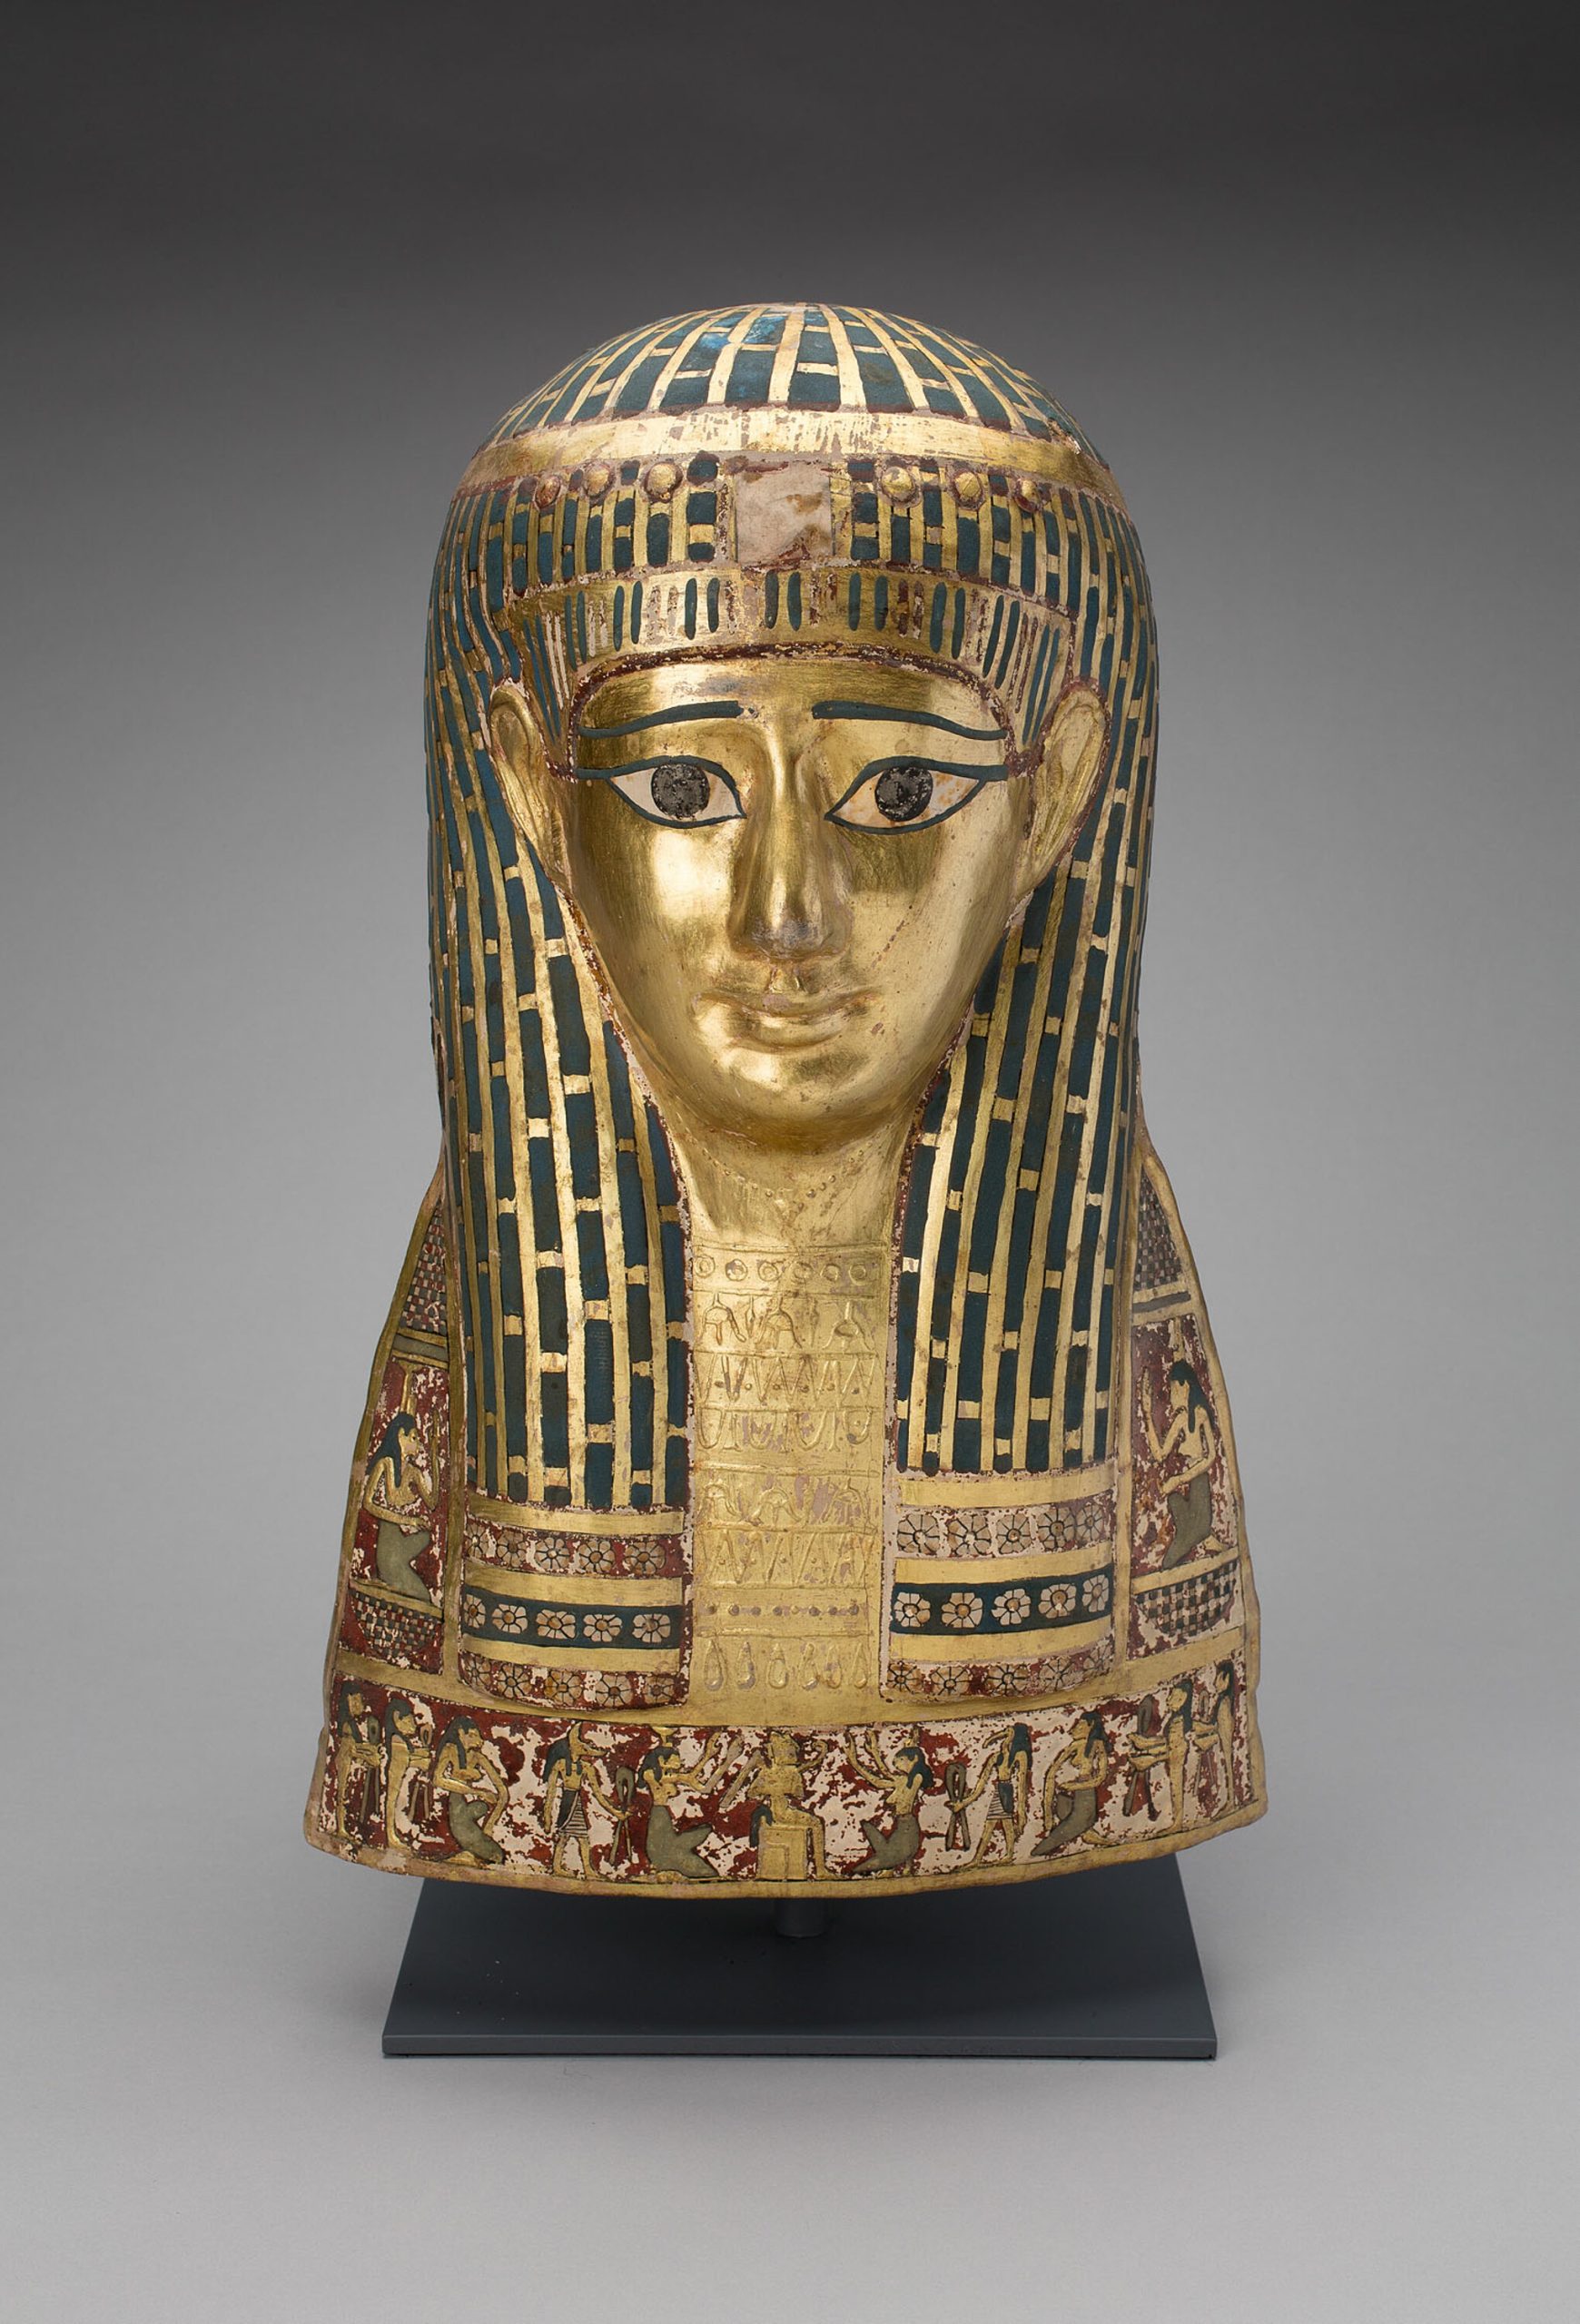 A mummy face cover with intricate gold and coloured details.